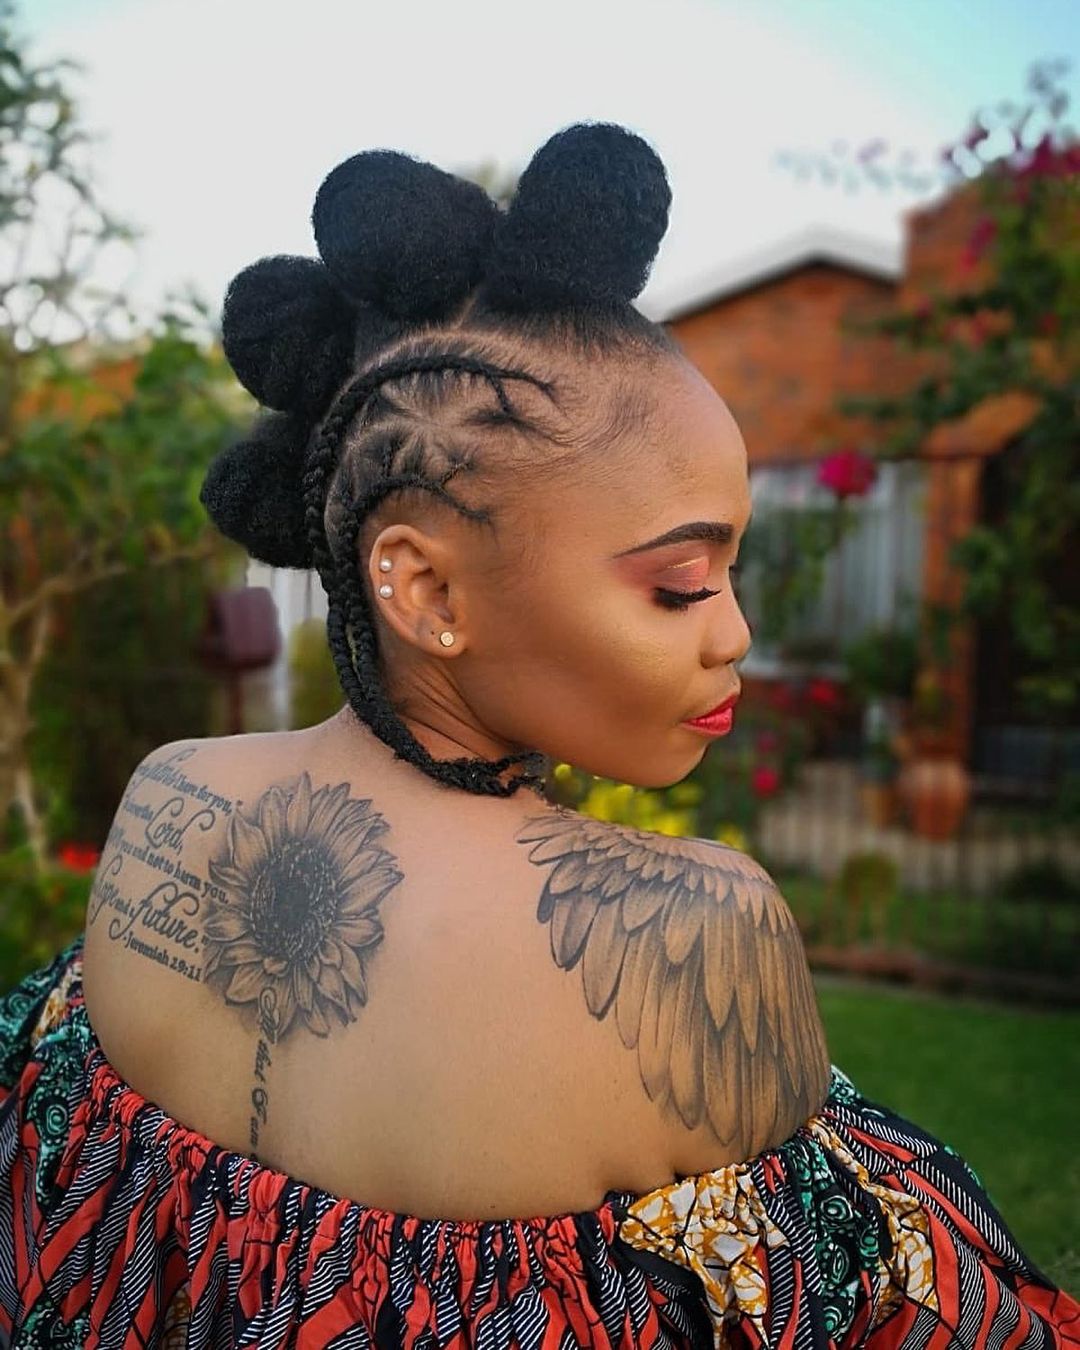 5 Of The Best Tattoo Parlours In Johannesburg - Dream Africa